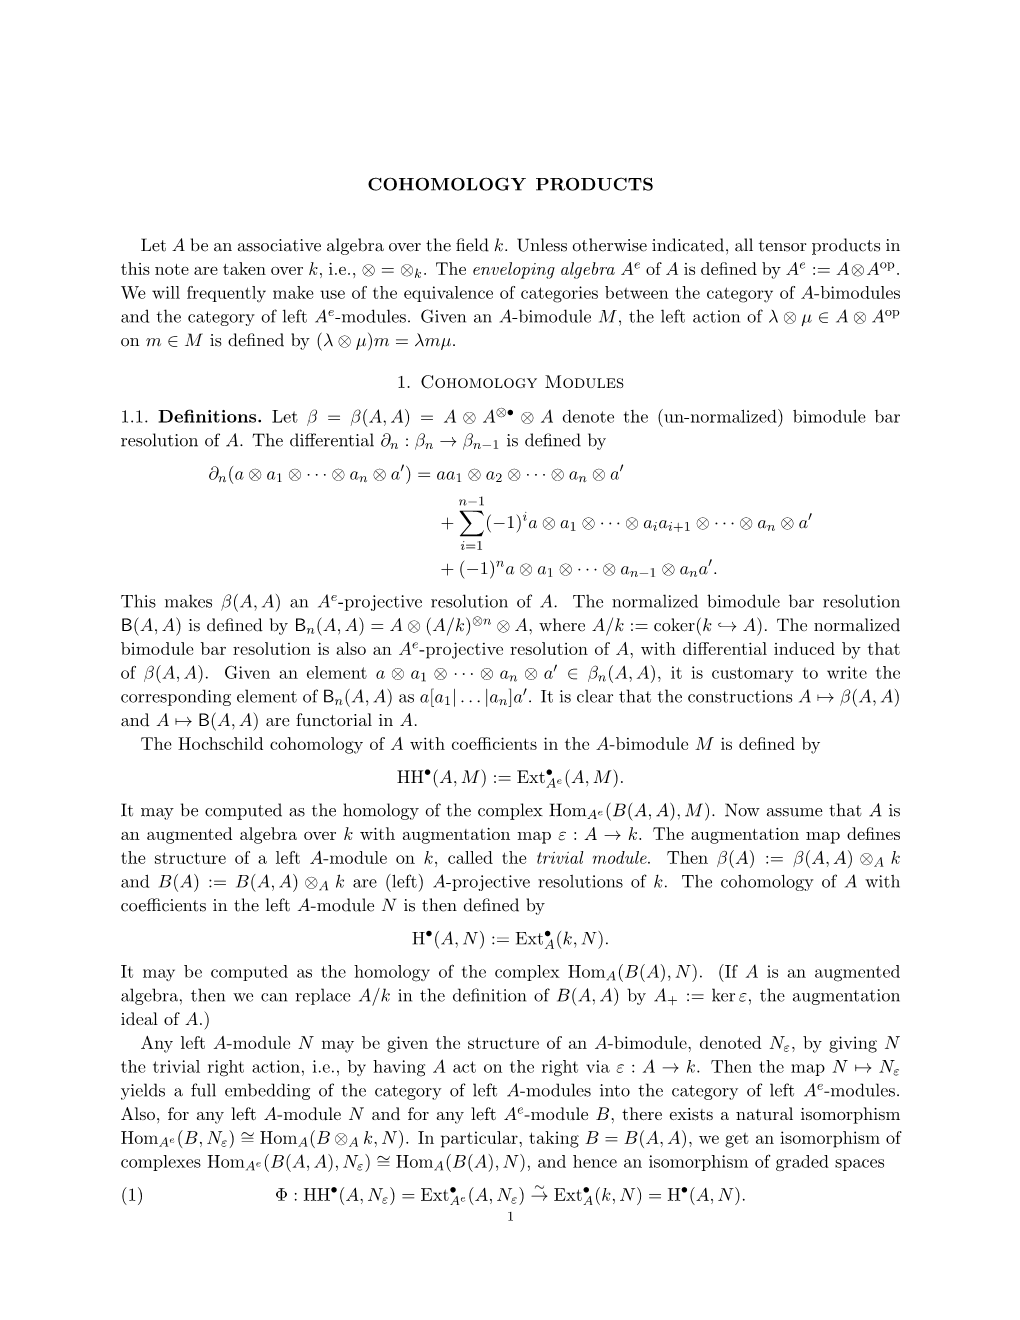 COHOMOLOGY PRODUCTS Let a Be an Associative Algebra Over The